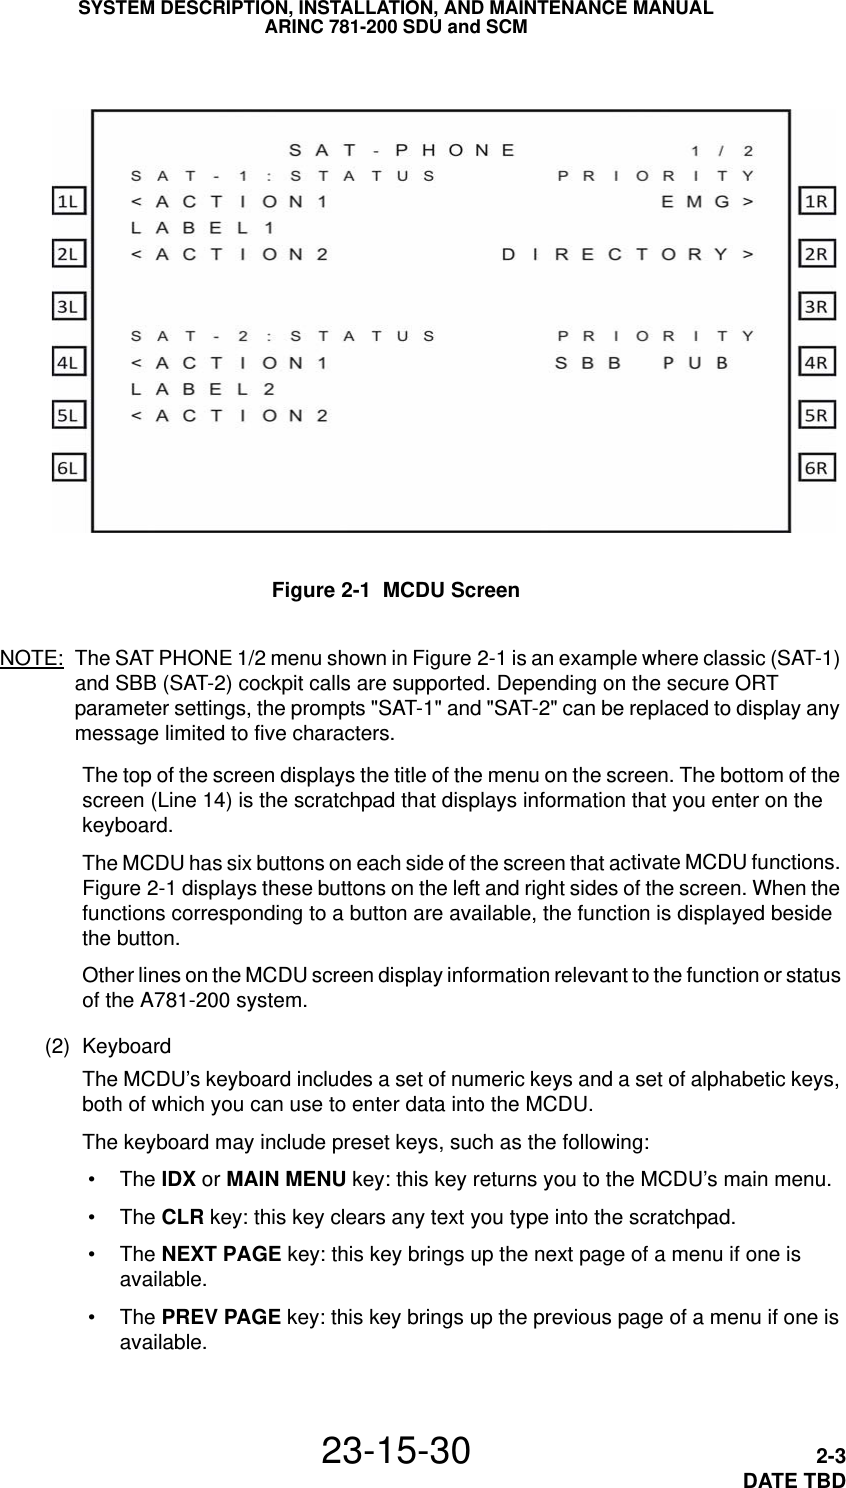 SYSTEM DESCRIPTION, INSTALLATION, AND MAINTENANCE MANUALARINC 781-200 SDU and SCM23-15-30 2-3DATE TBDFigure 2-1  MCDU ScreenNOTE: The SAT PHONE 1/2 menu shown in Figure 2-1 is an example where classic (SAT-1) and SBB (SAT-2) cockpit calls are supported. Depending on the secure ORT parameter settings, the prompts &quot;SAT-1&quot; and &quot;SAT-2&quot; can be replaced to display any message limited to five characters.The top of the screen displays the title of the menu on the screen. The bottom of the screen (Line 14) is the scratchpad that displays information that you enter on the keyboard.The MCDU has six buttons on each side of the screen that activate MCDU functions. Figure 2-1 displays these buttons on the left and right sides of the screen. When the functions corresponding to a button are available, the function is displayed beside the button.Other lines on the MCDU screen display information relevant to the function or status of the A781-200 system. (2) KeyboardThe MCDU’s keyboard includes a set of numeric keys and a set of alphabetic keys, both of which you can use to enter data into the MCDU.The keyboard may include preset keys, such as the following: •The IDX or MAIN MENU key: this key returns you to the MCDU’s main menu. •The CLR key: this key clears any text you type into the scratchpad. •The NEXT PAGE key: this key brings up the next page of a menu if one is available. •The PREV PAGE key: this key brings up the previous page of a menu if one is available.